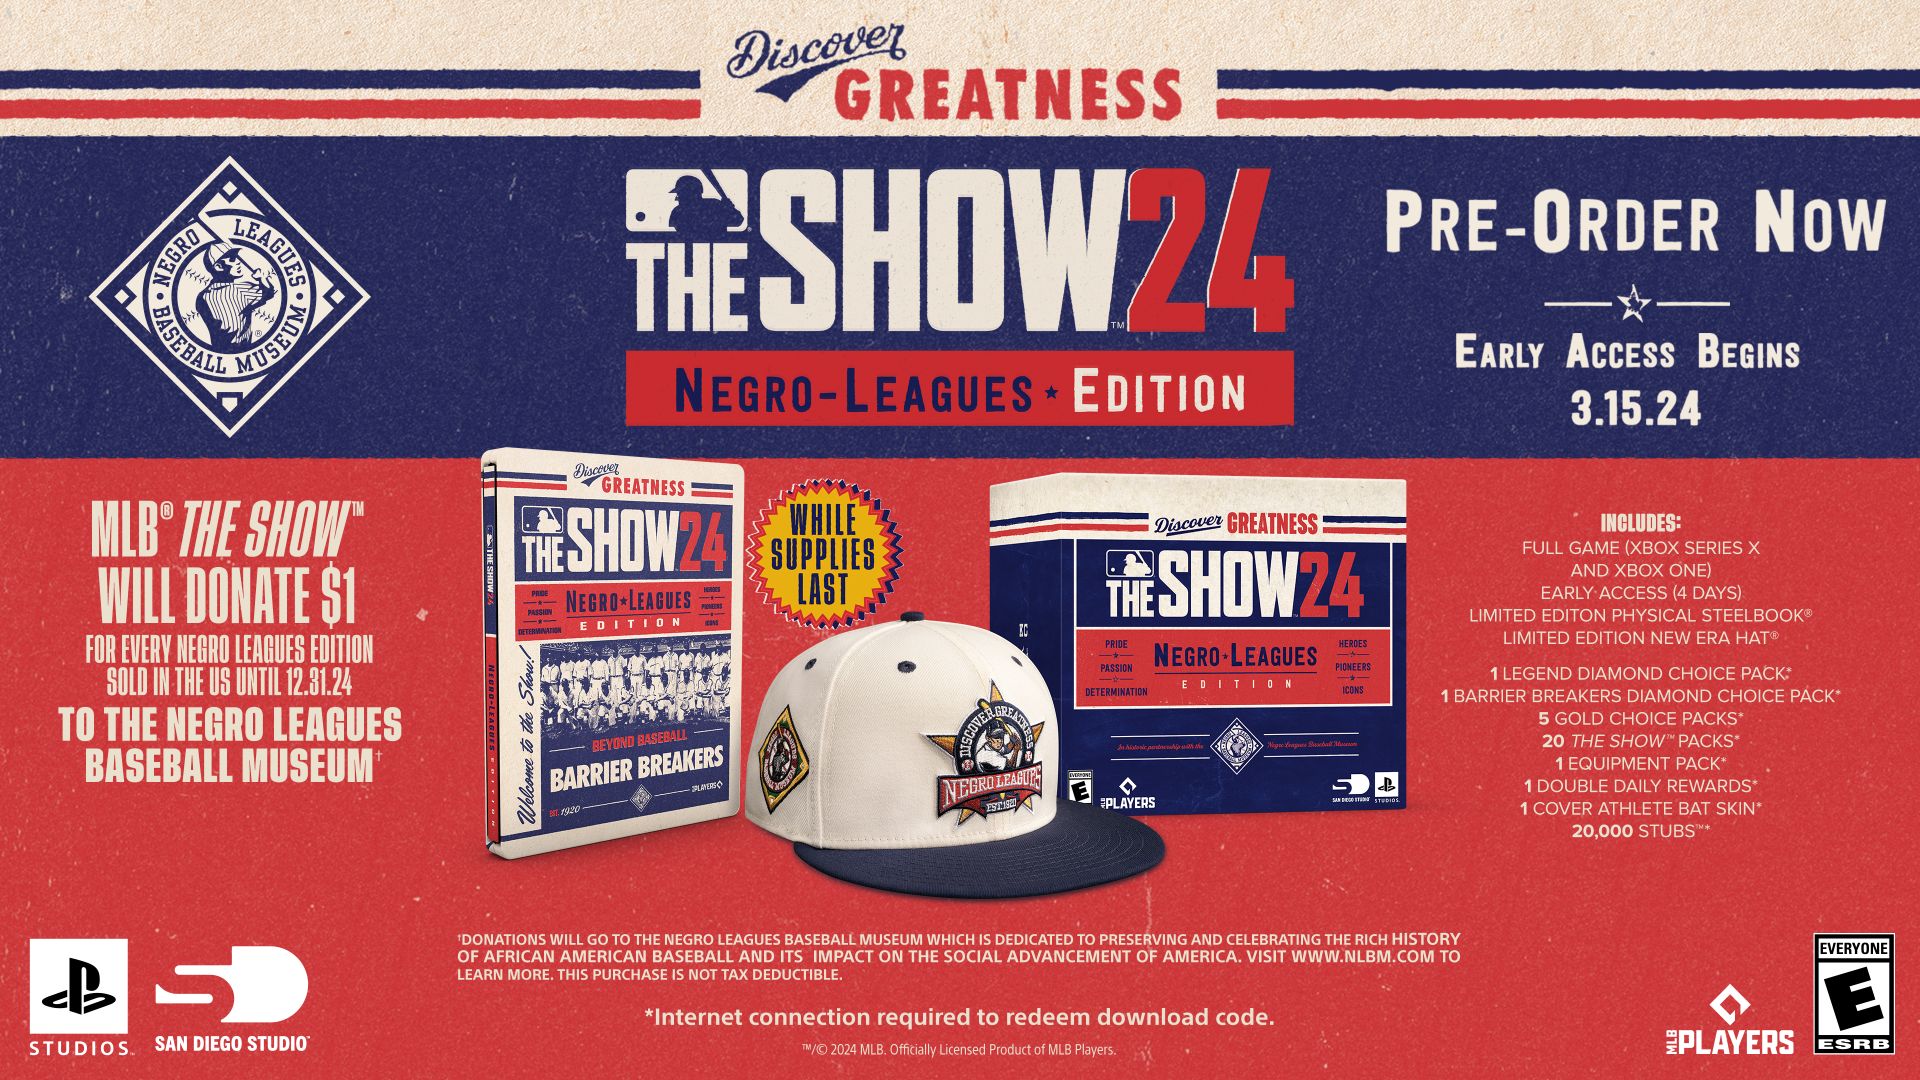 MLB The Show 24 Negro Leagues Edition Image